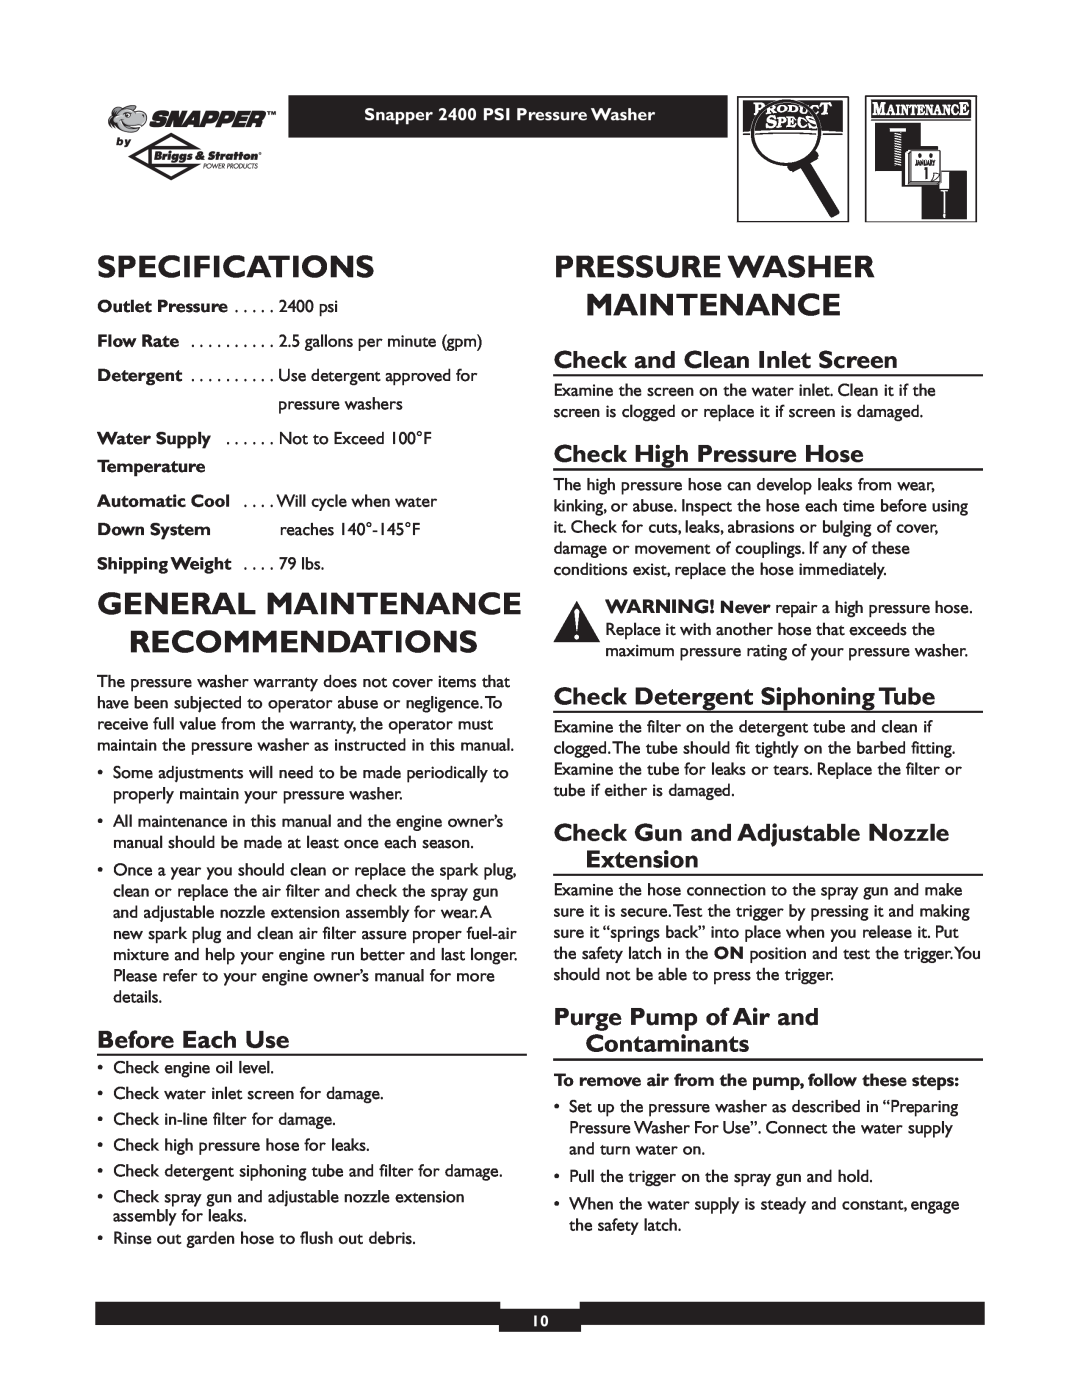 Snapper 1660-0 Specifications, General Maintenance Recommendations, Pressure Washer Maintenance, Check High Pressure Hose 